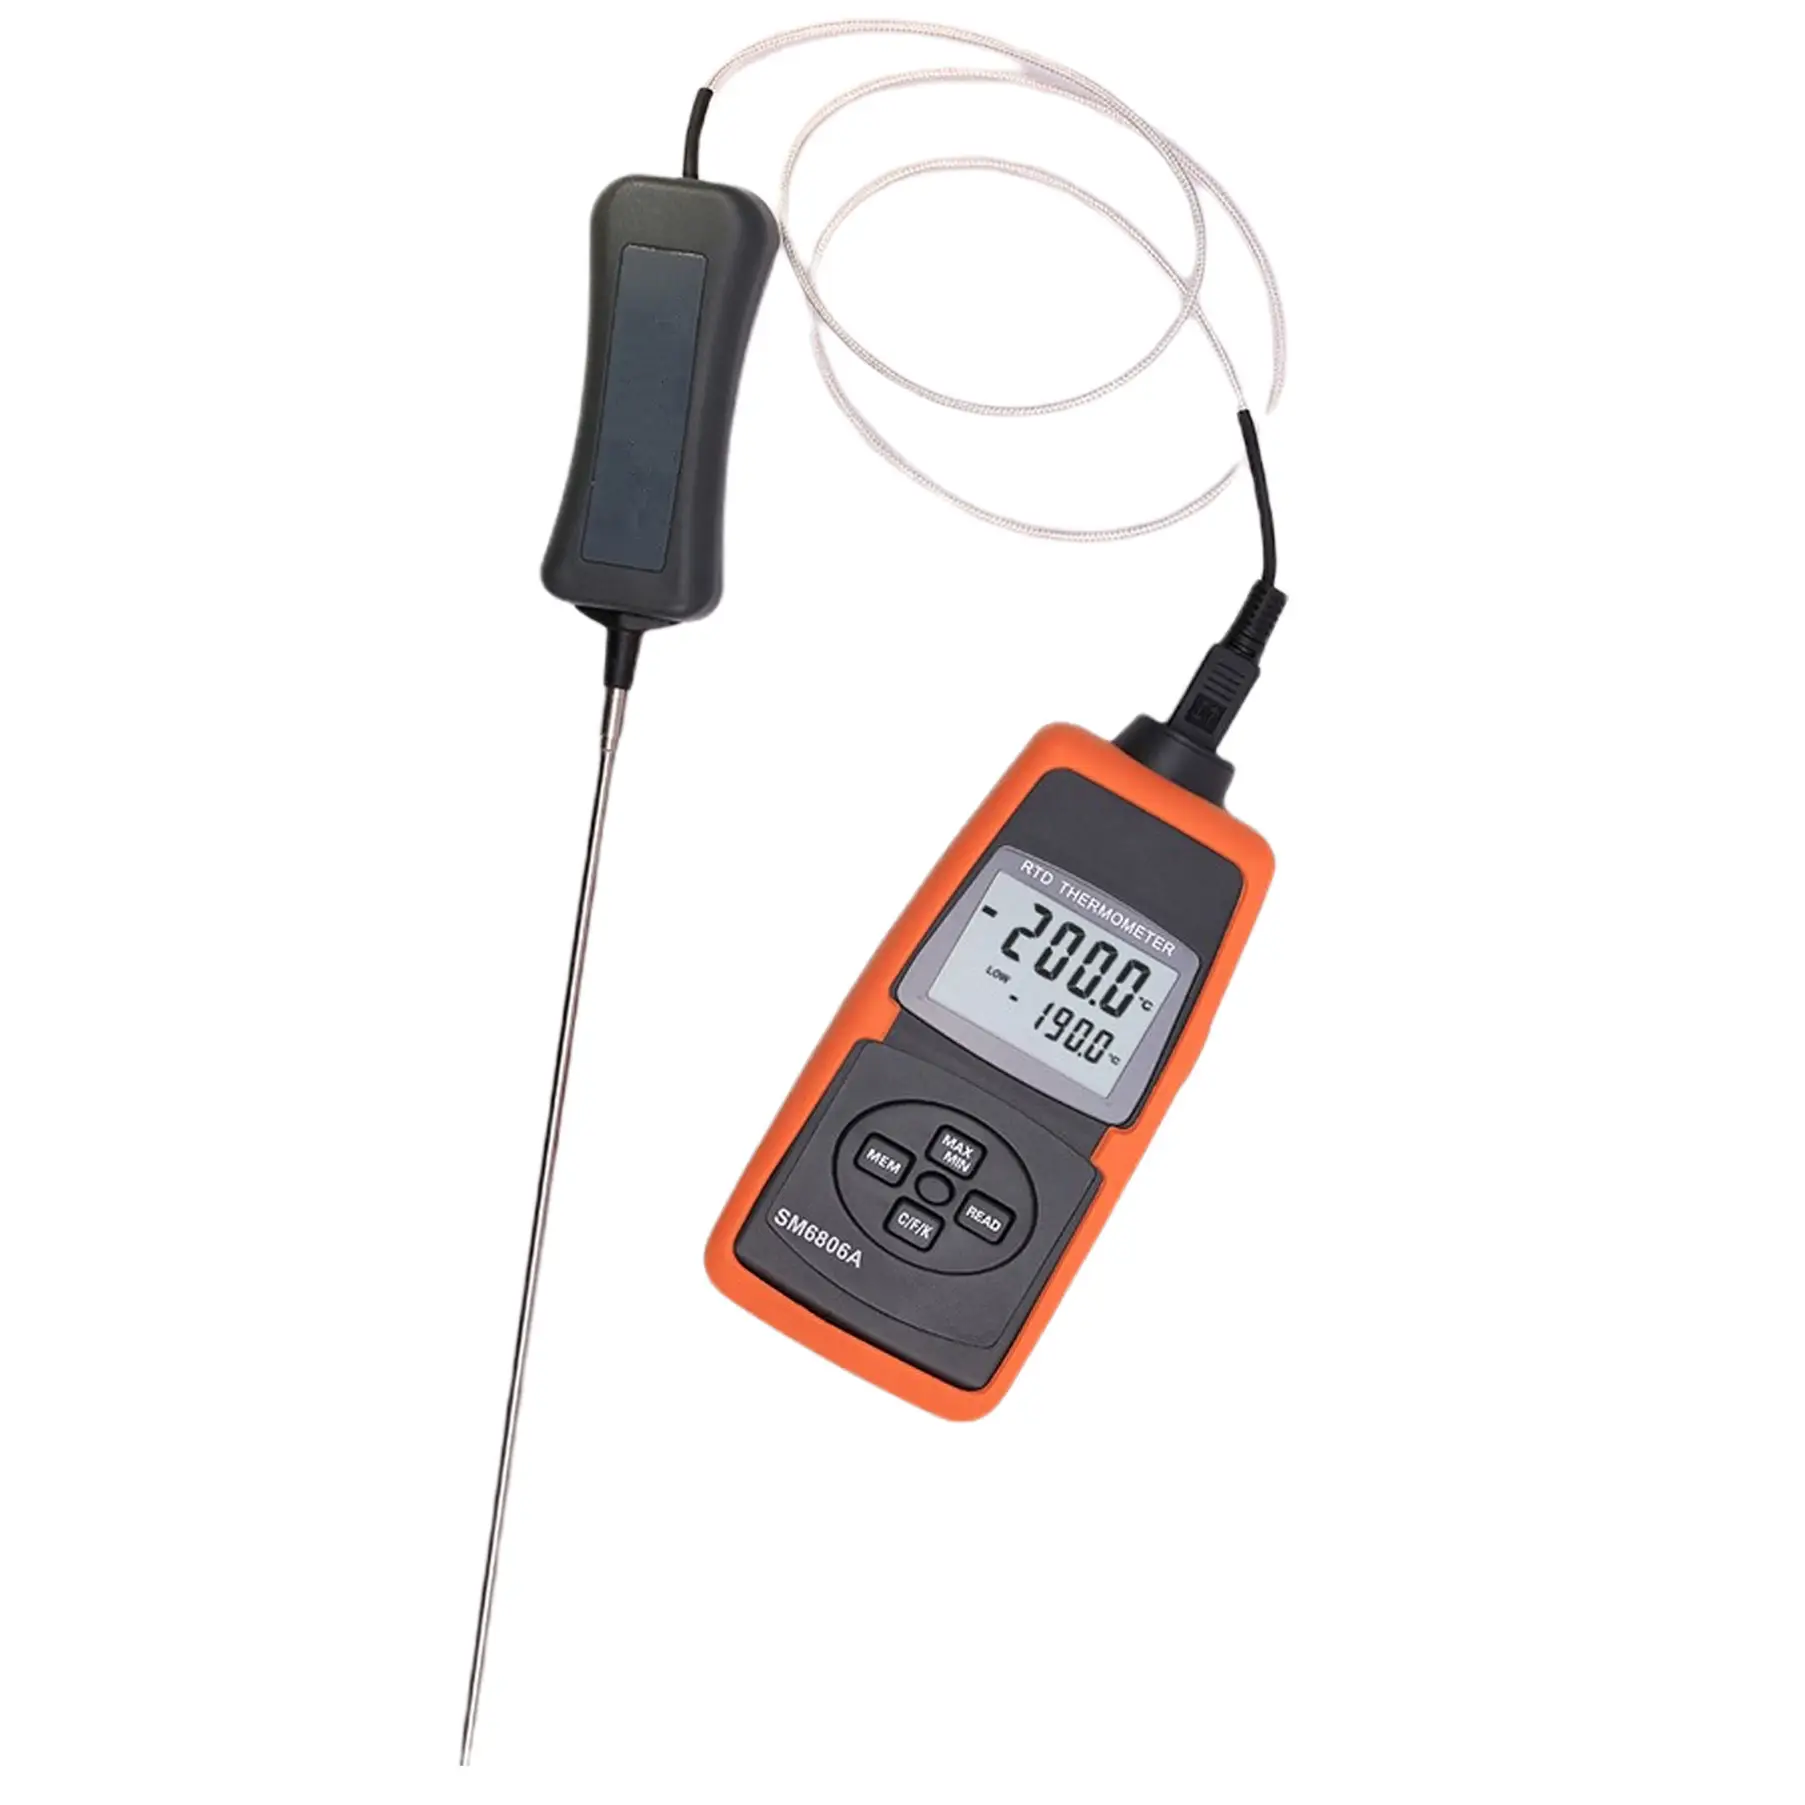 RTD digital thermometer high precise temperature measurement SM6806A from -200~600 Celsius degree